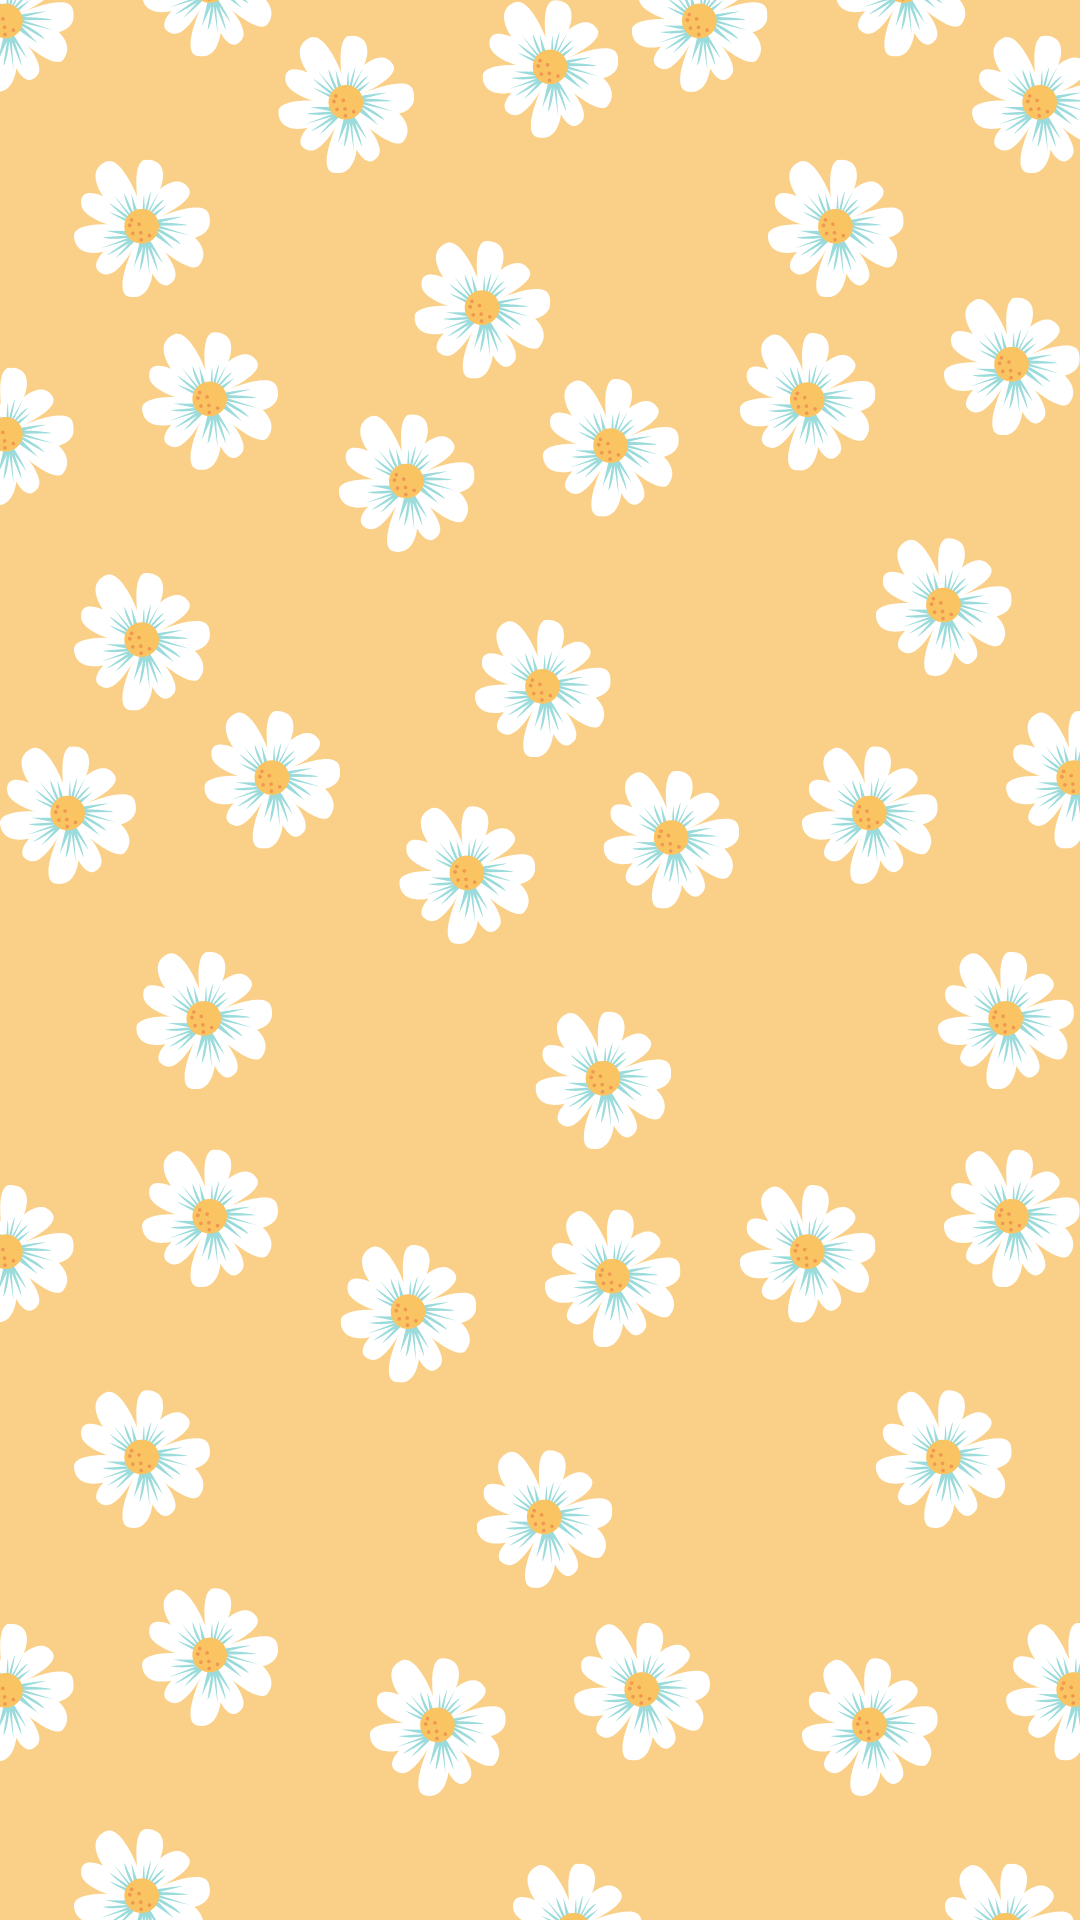 iPhone background. Phone wallpaper patterns, Galaxy wallpaper, Wallpaper iphone cute